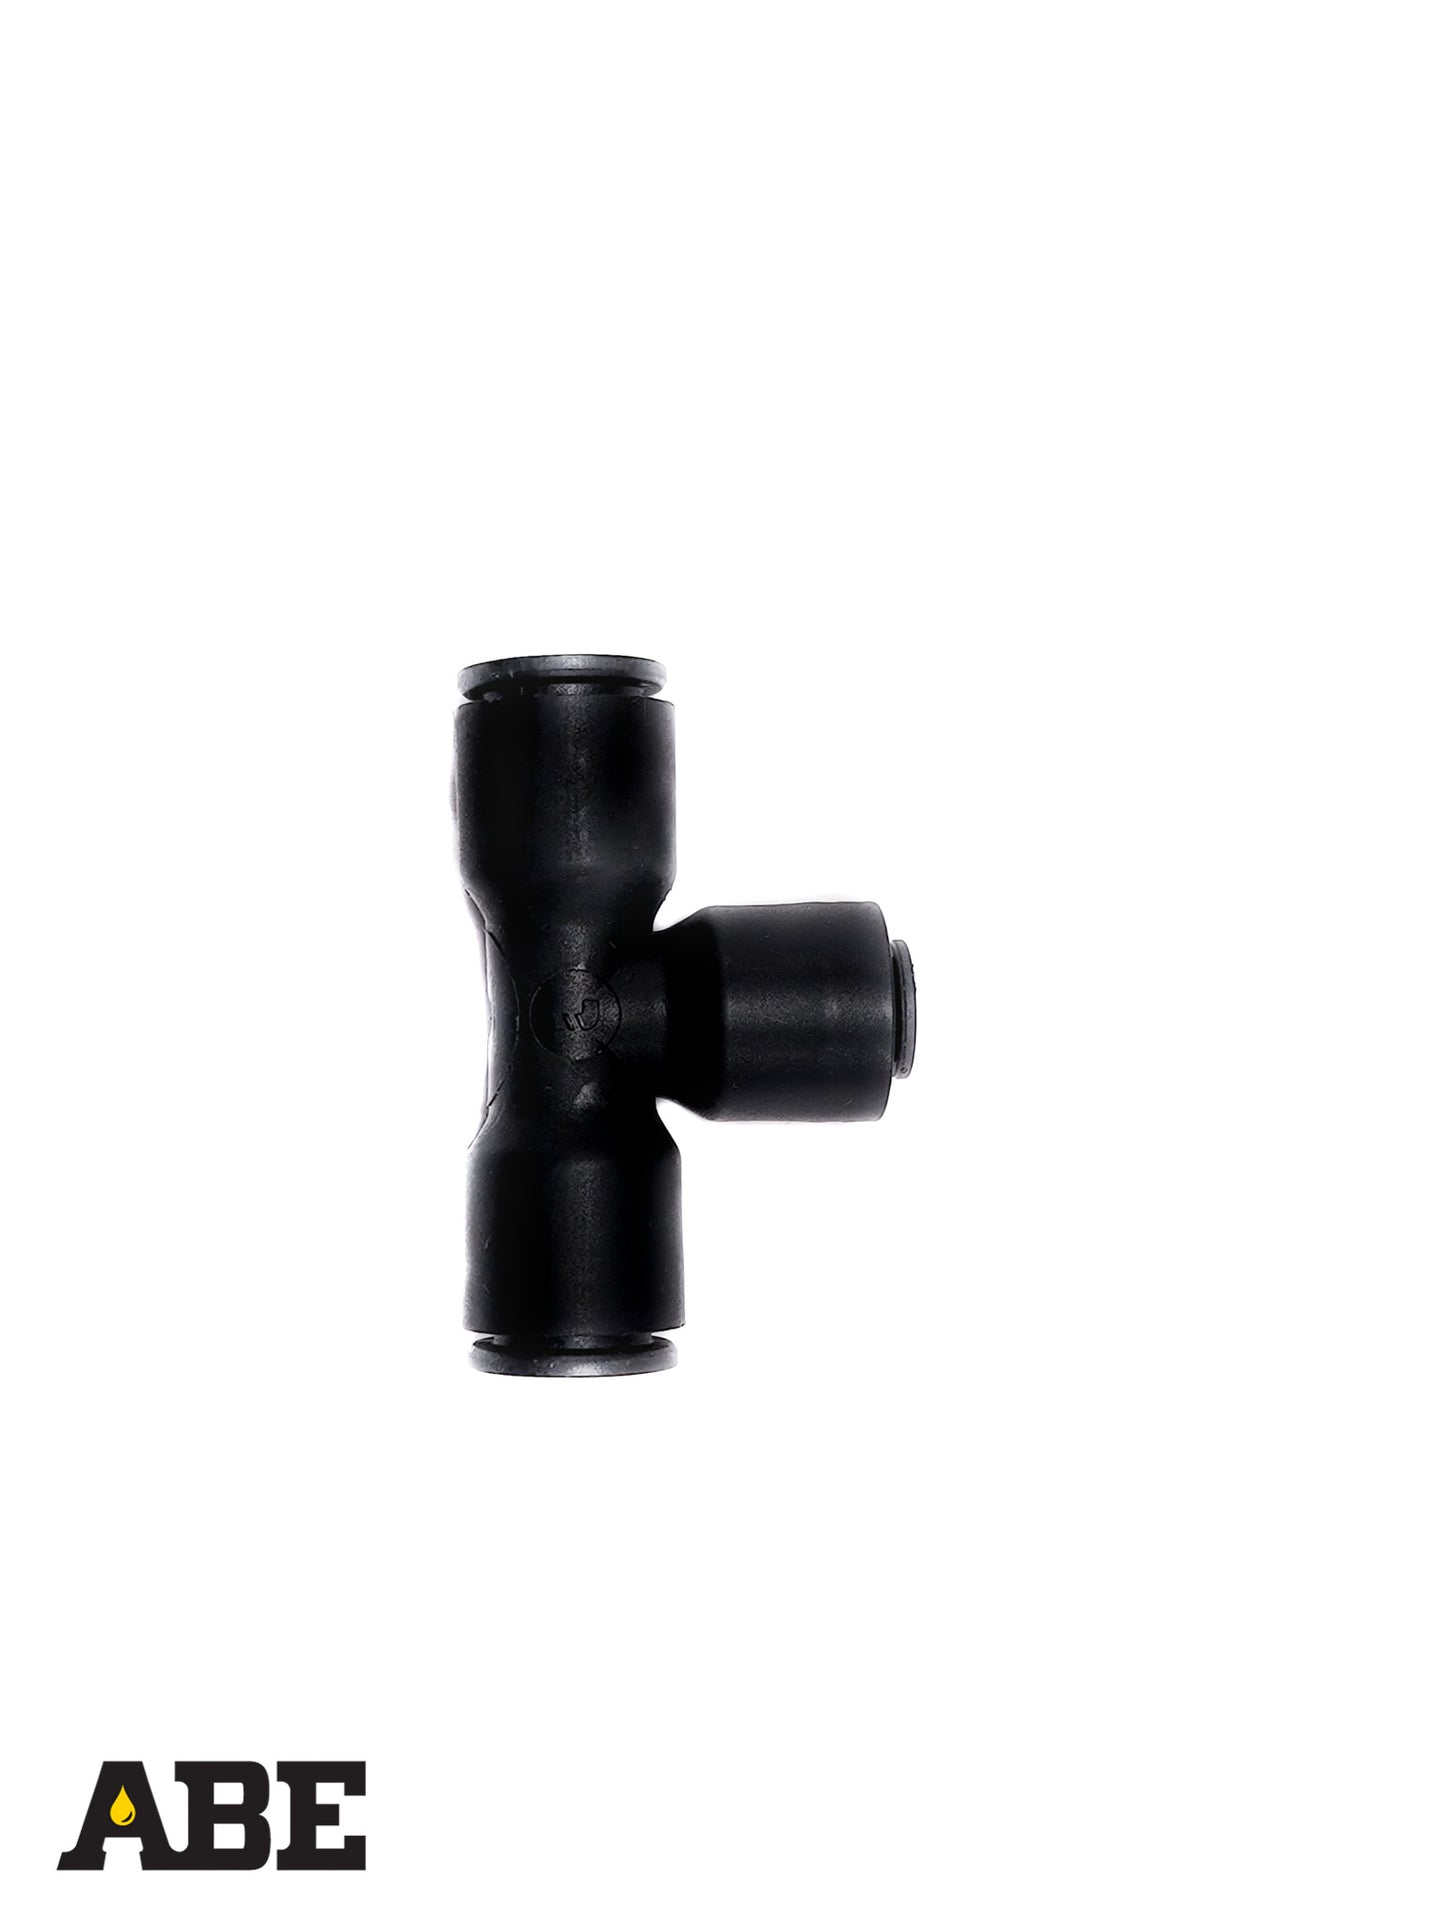 3/8" x 3/8" x 1/4" Push-To Connect Adapter Tee